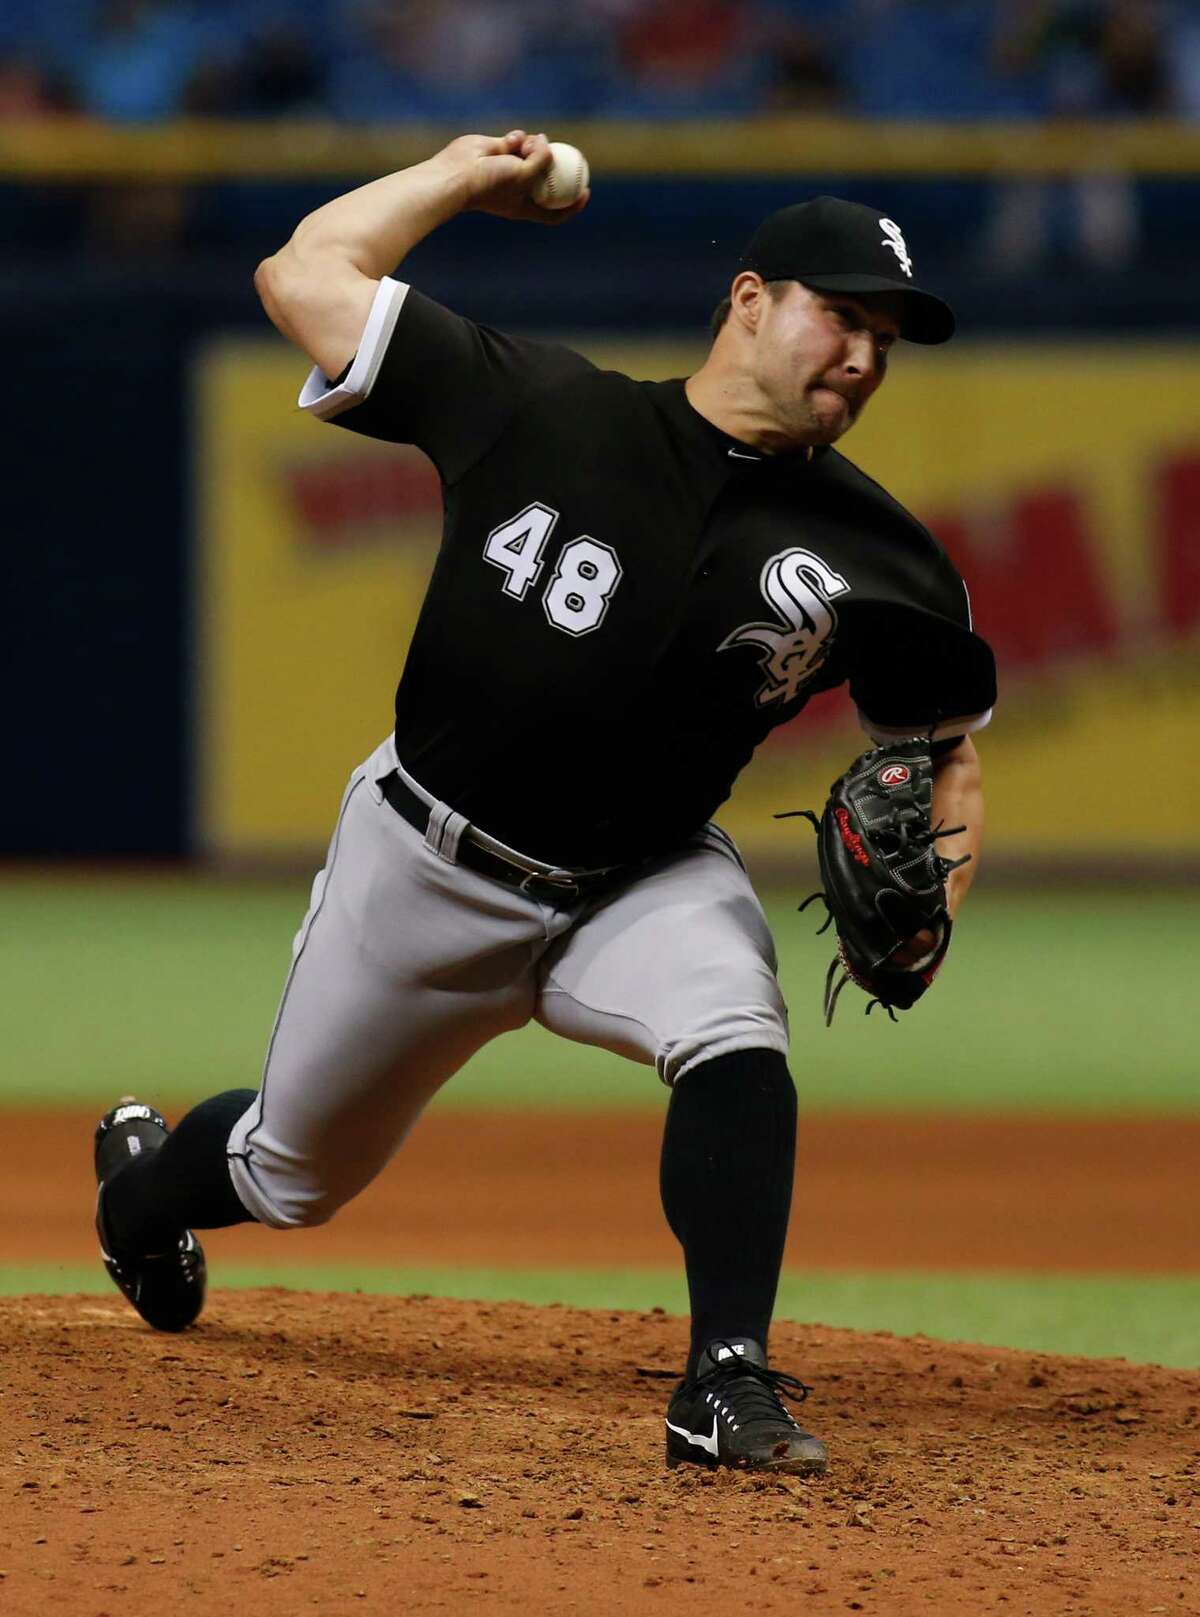 Shaker grad, Yankees pitcher Tommy Kahnle optioned to Triple-A – troyrecord